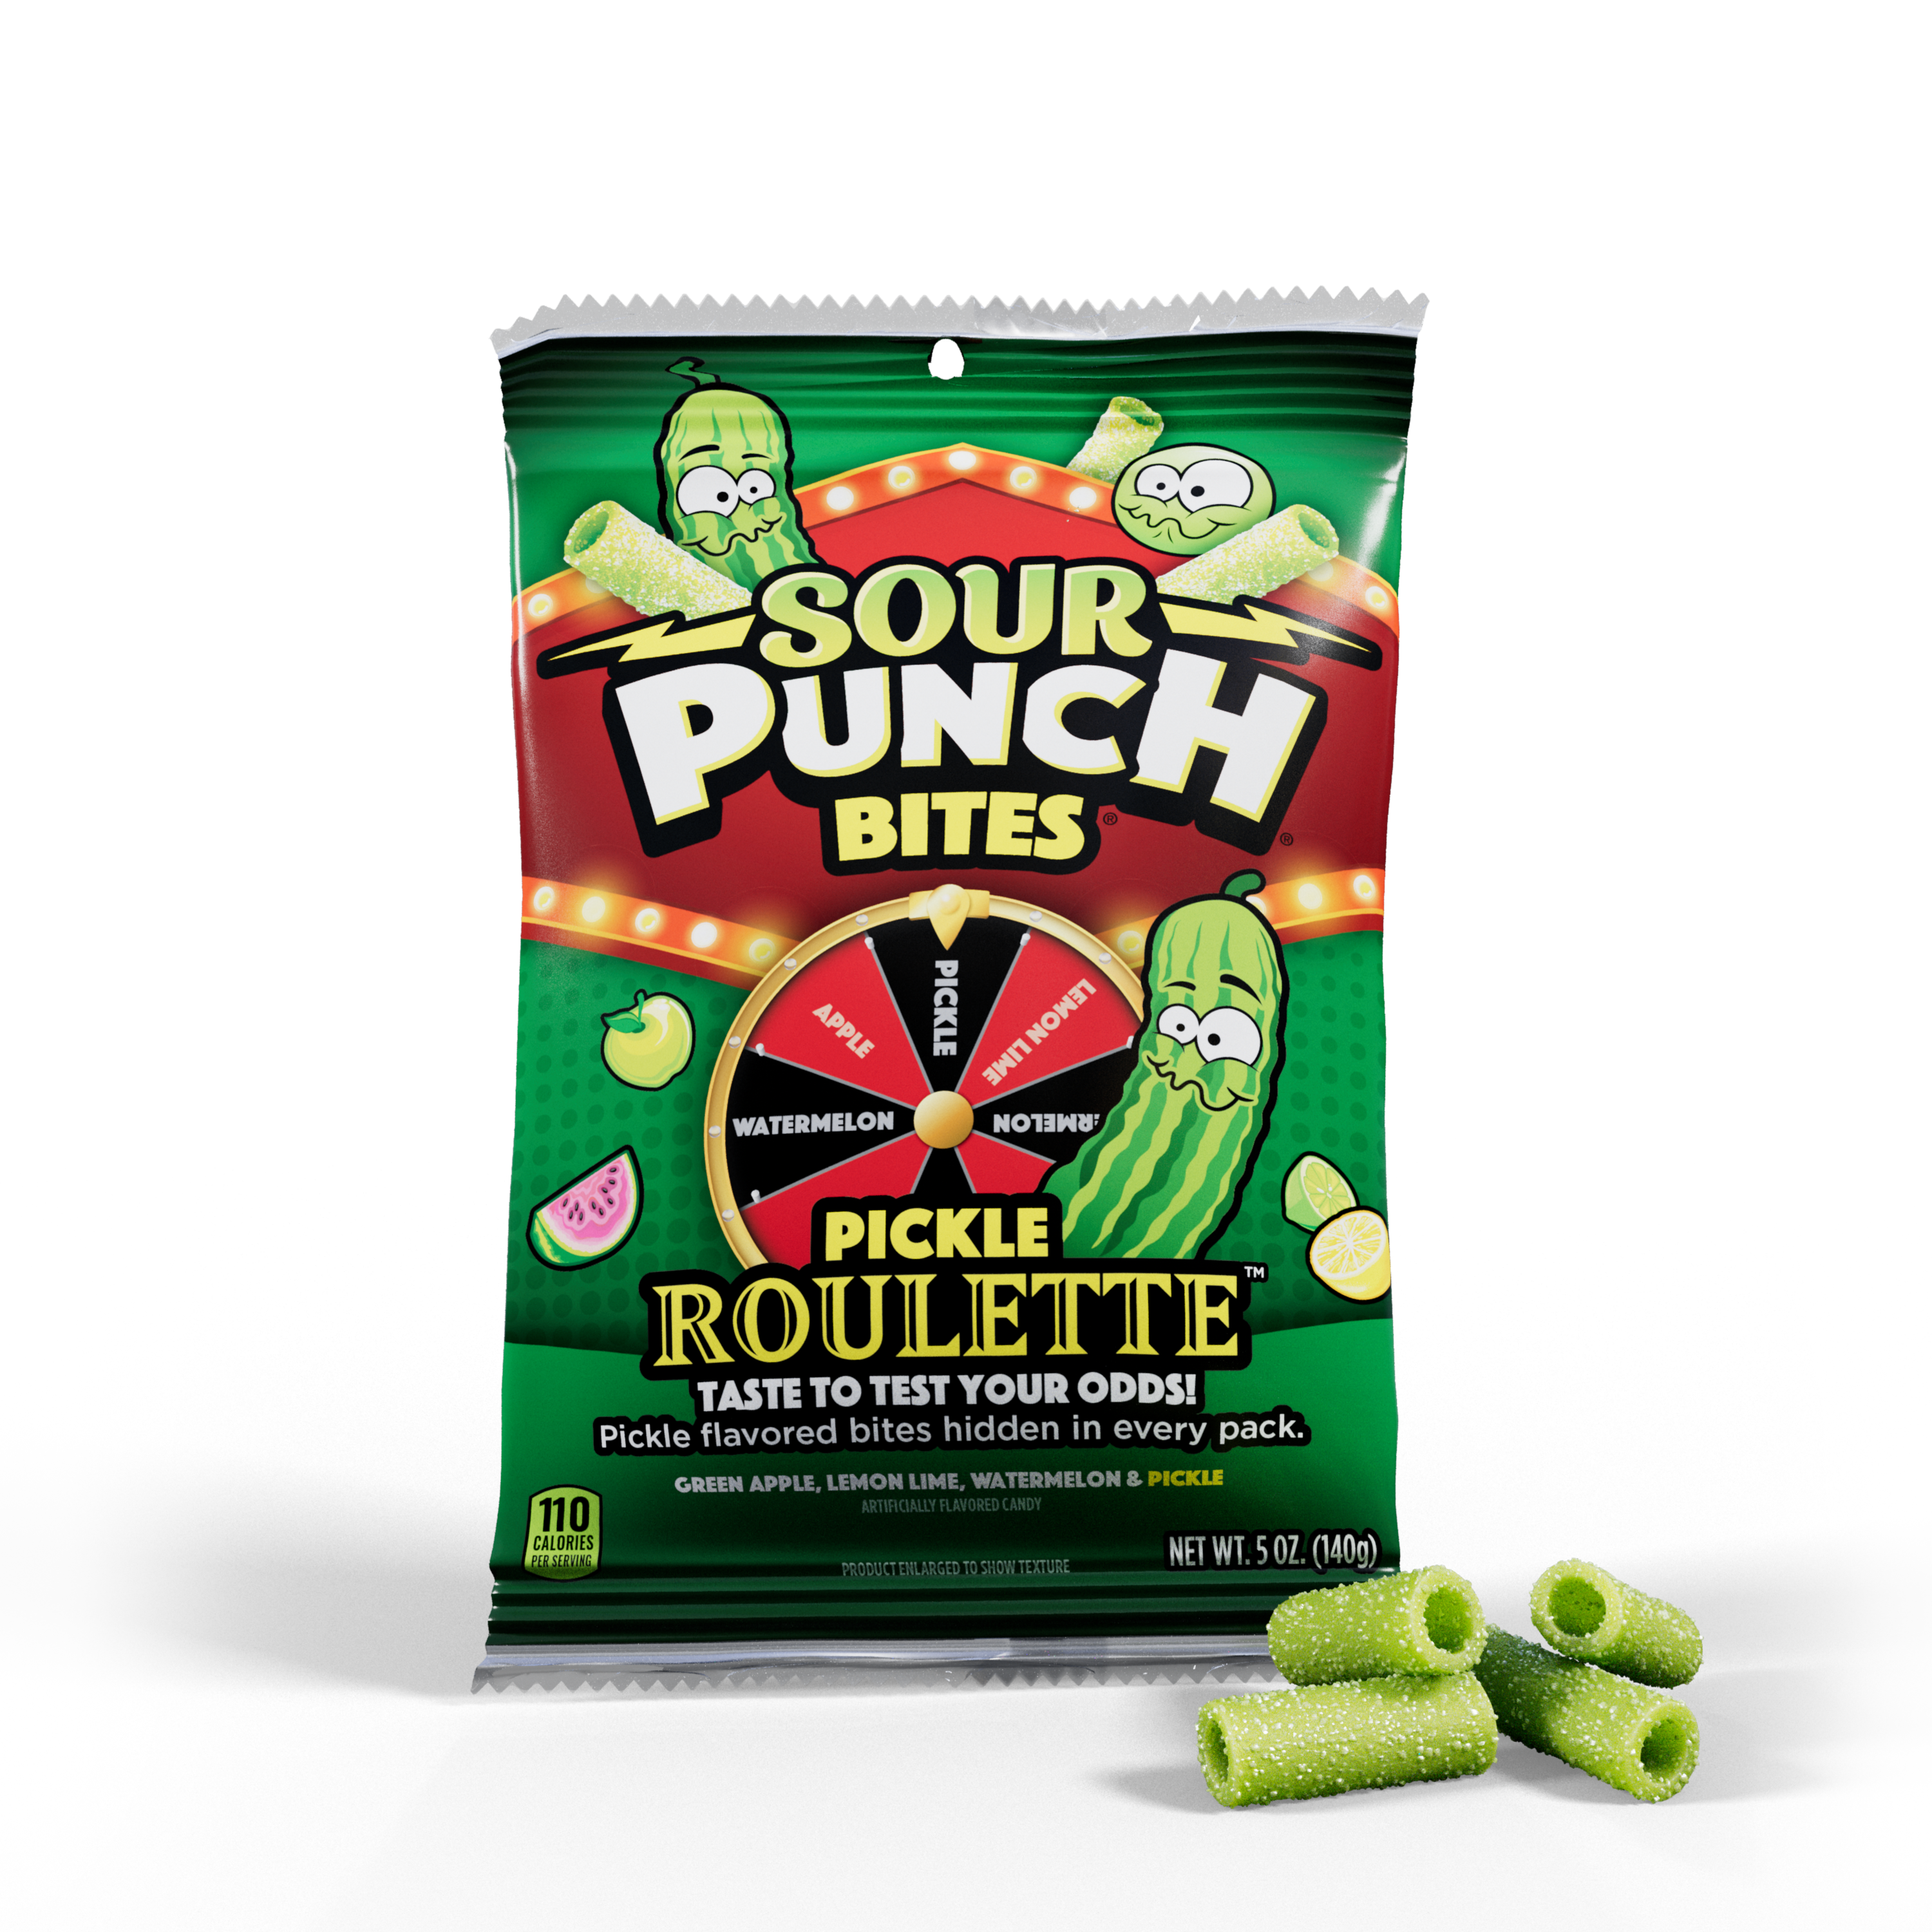 SOUR PUNCH Pickle Roulette Bites - Pickle Candy Bites - Front of Pack with bites in front of the bag